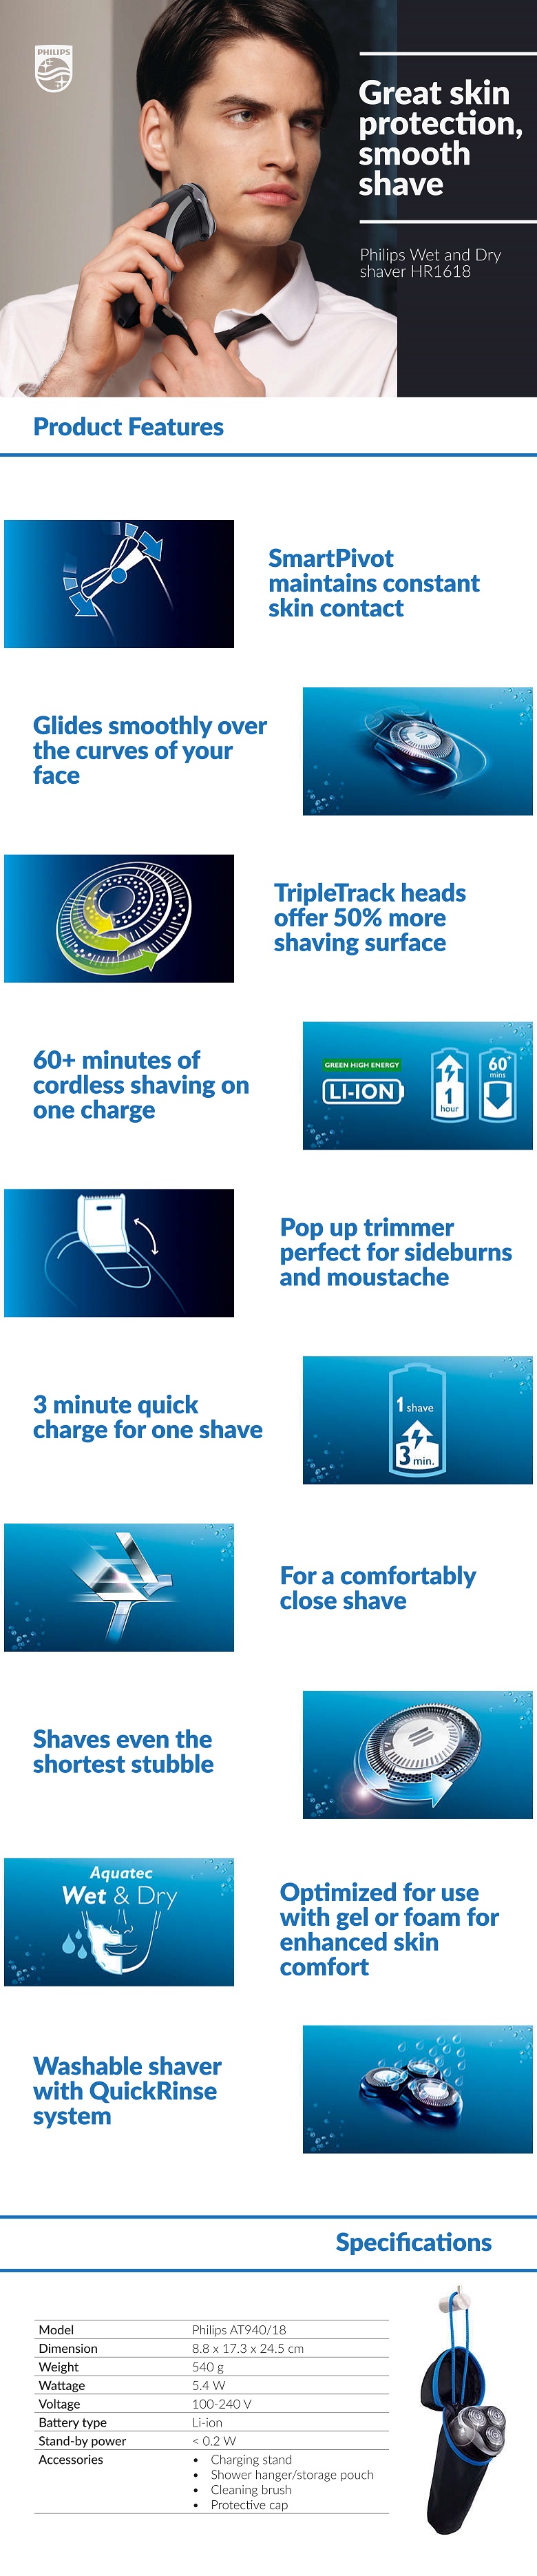 Philips AT940 Aquatouch Wet & Dry Shaver PD